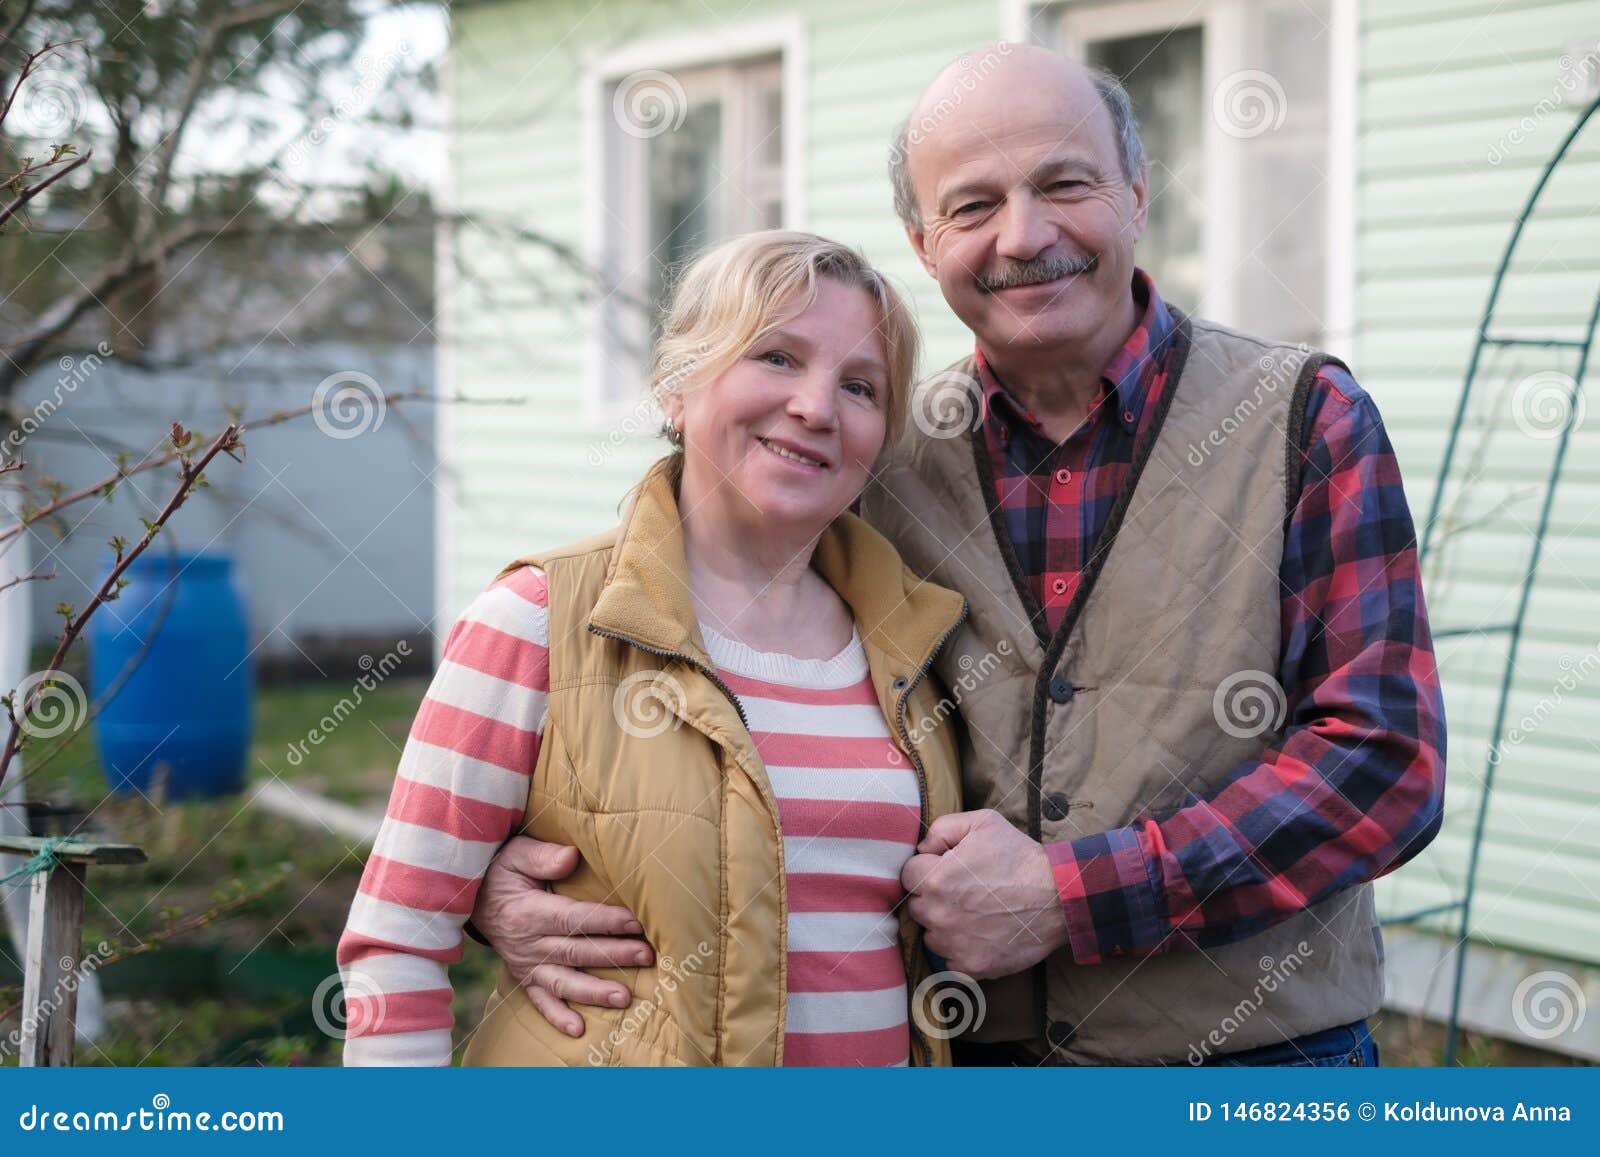 https://thumbs.dreamstime.com/z/mature-european-couple-embracing-front-house-happy-marriage-concept-146824356.jpg